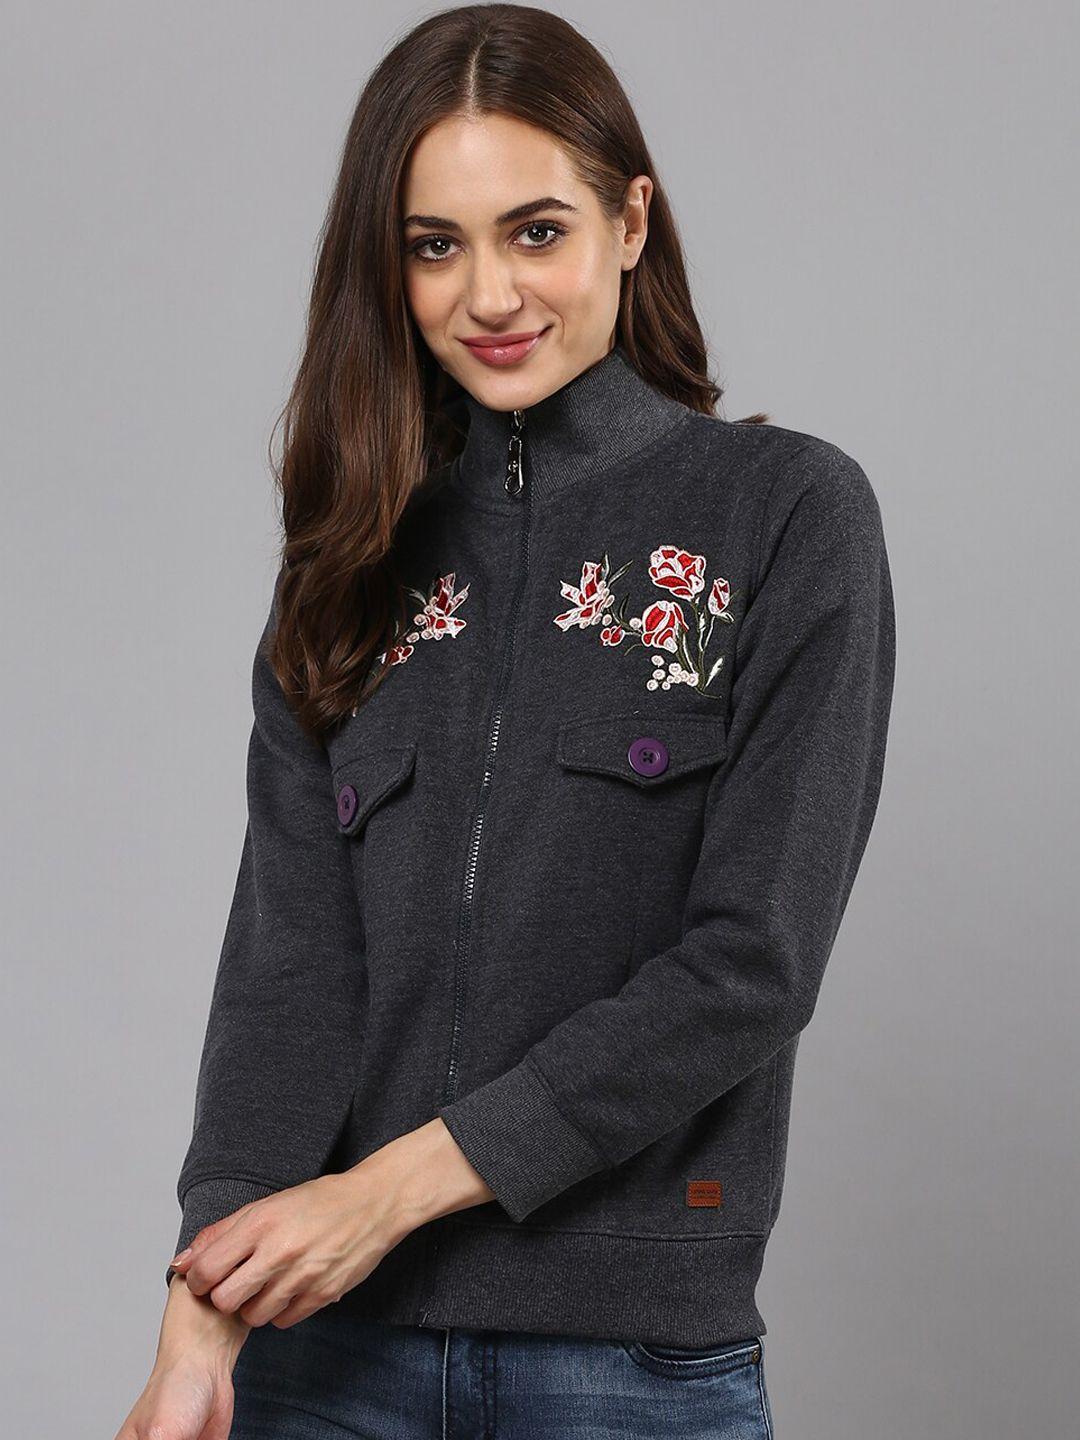 campus-sutra-women-charcoal-grey-&-red-embroidered-sweatshirt